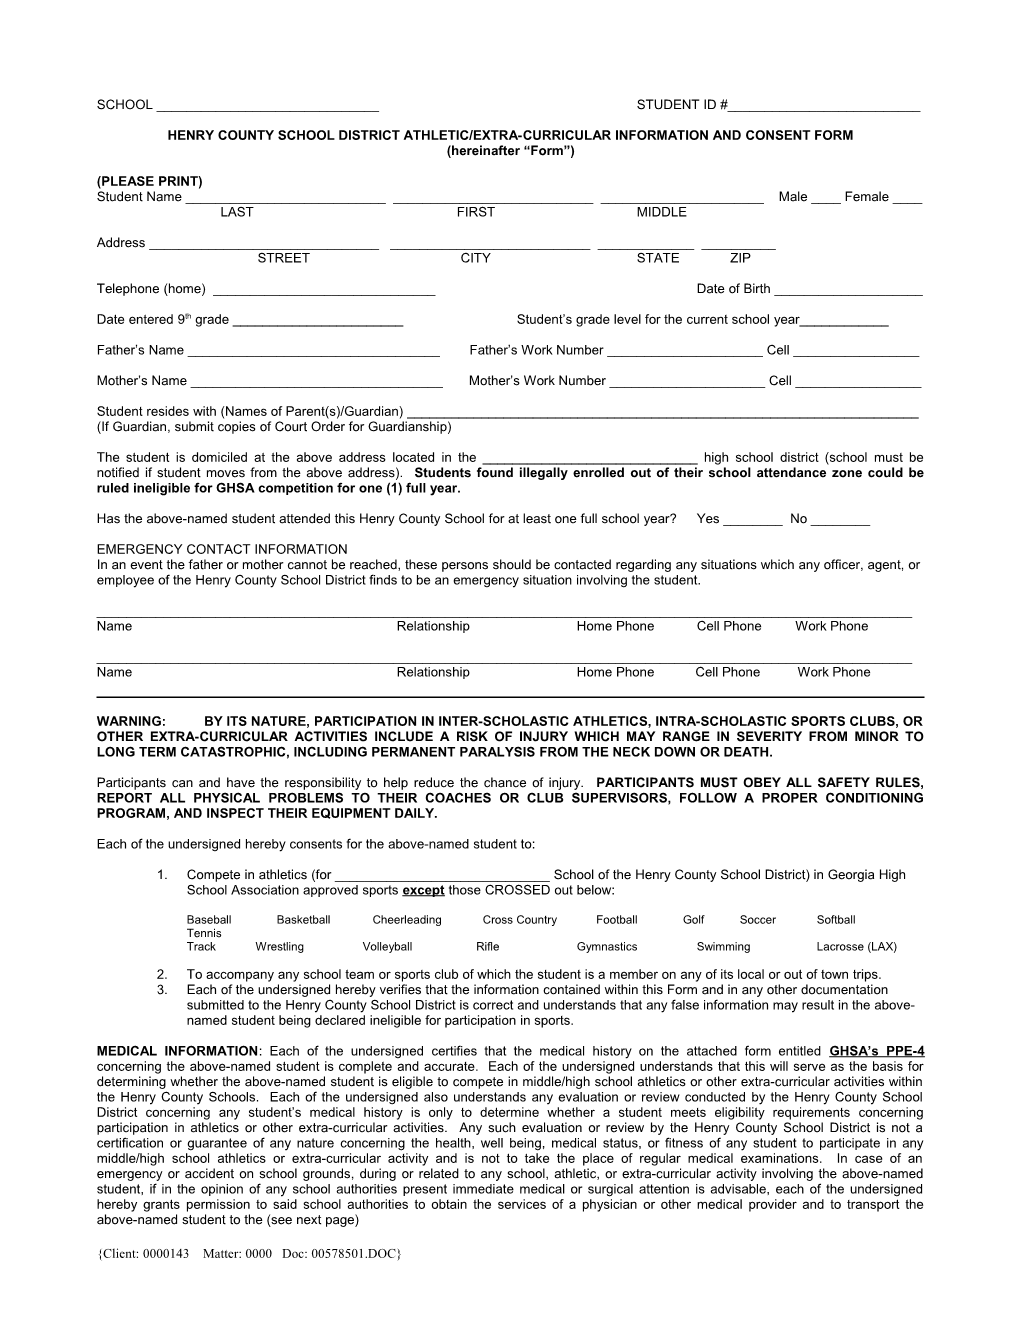 2010 Draft Extracurricular Consent Form (00578501-7)